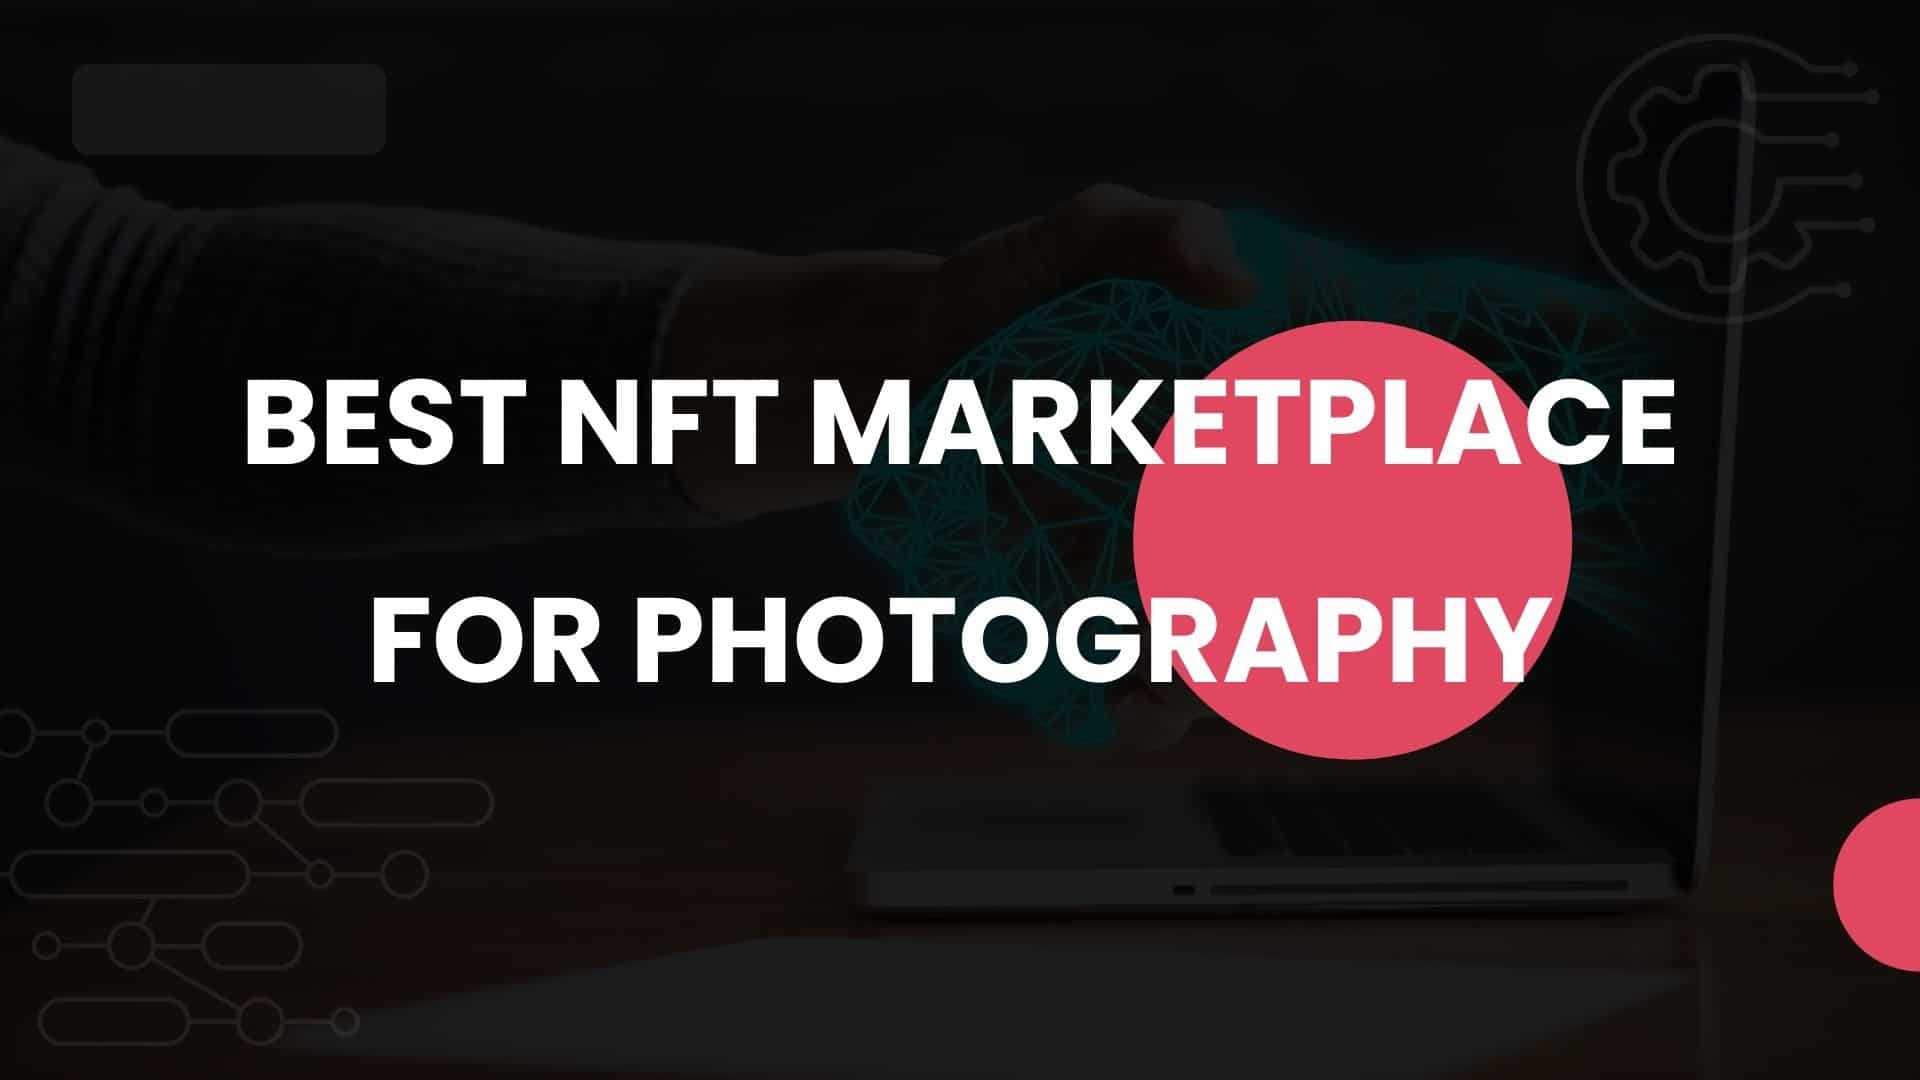 Best Nft Marketplace For Photography - Featured Image